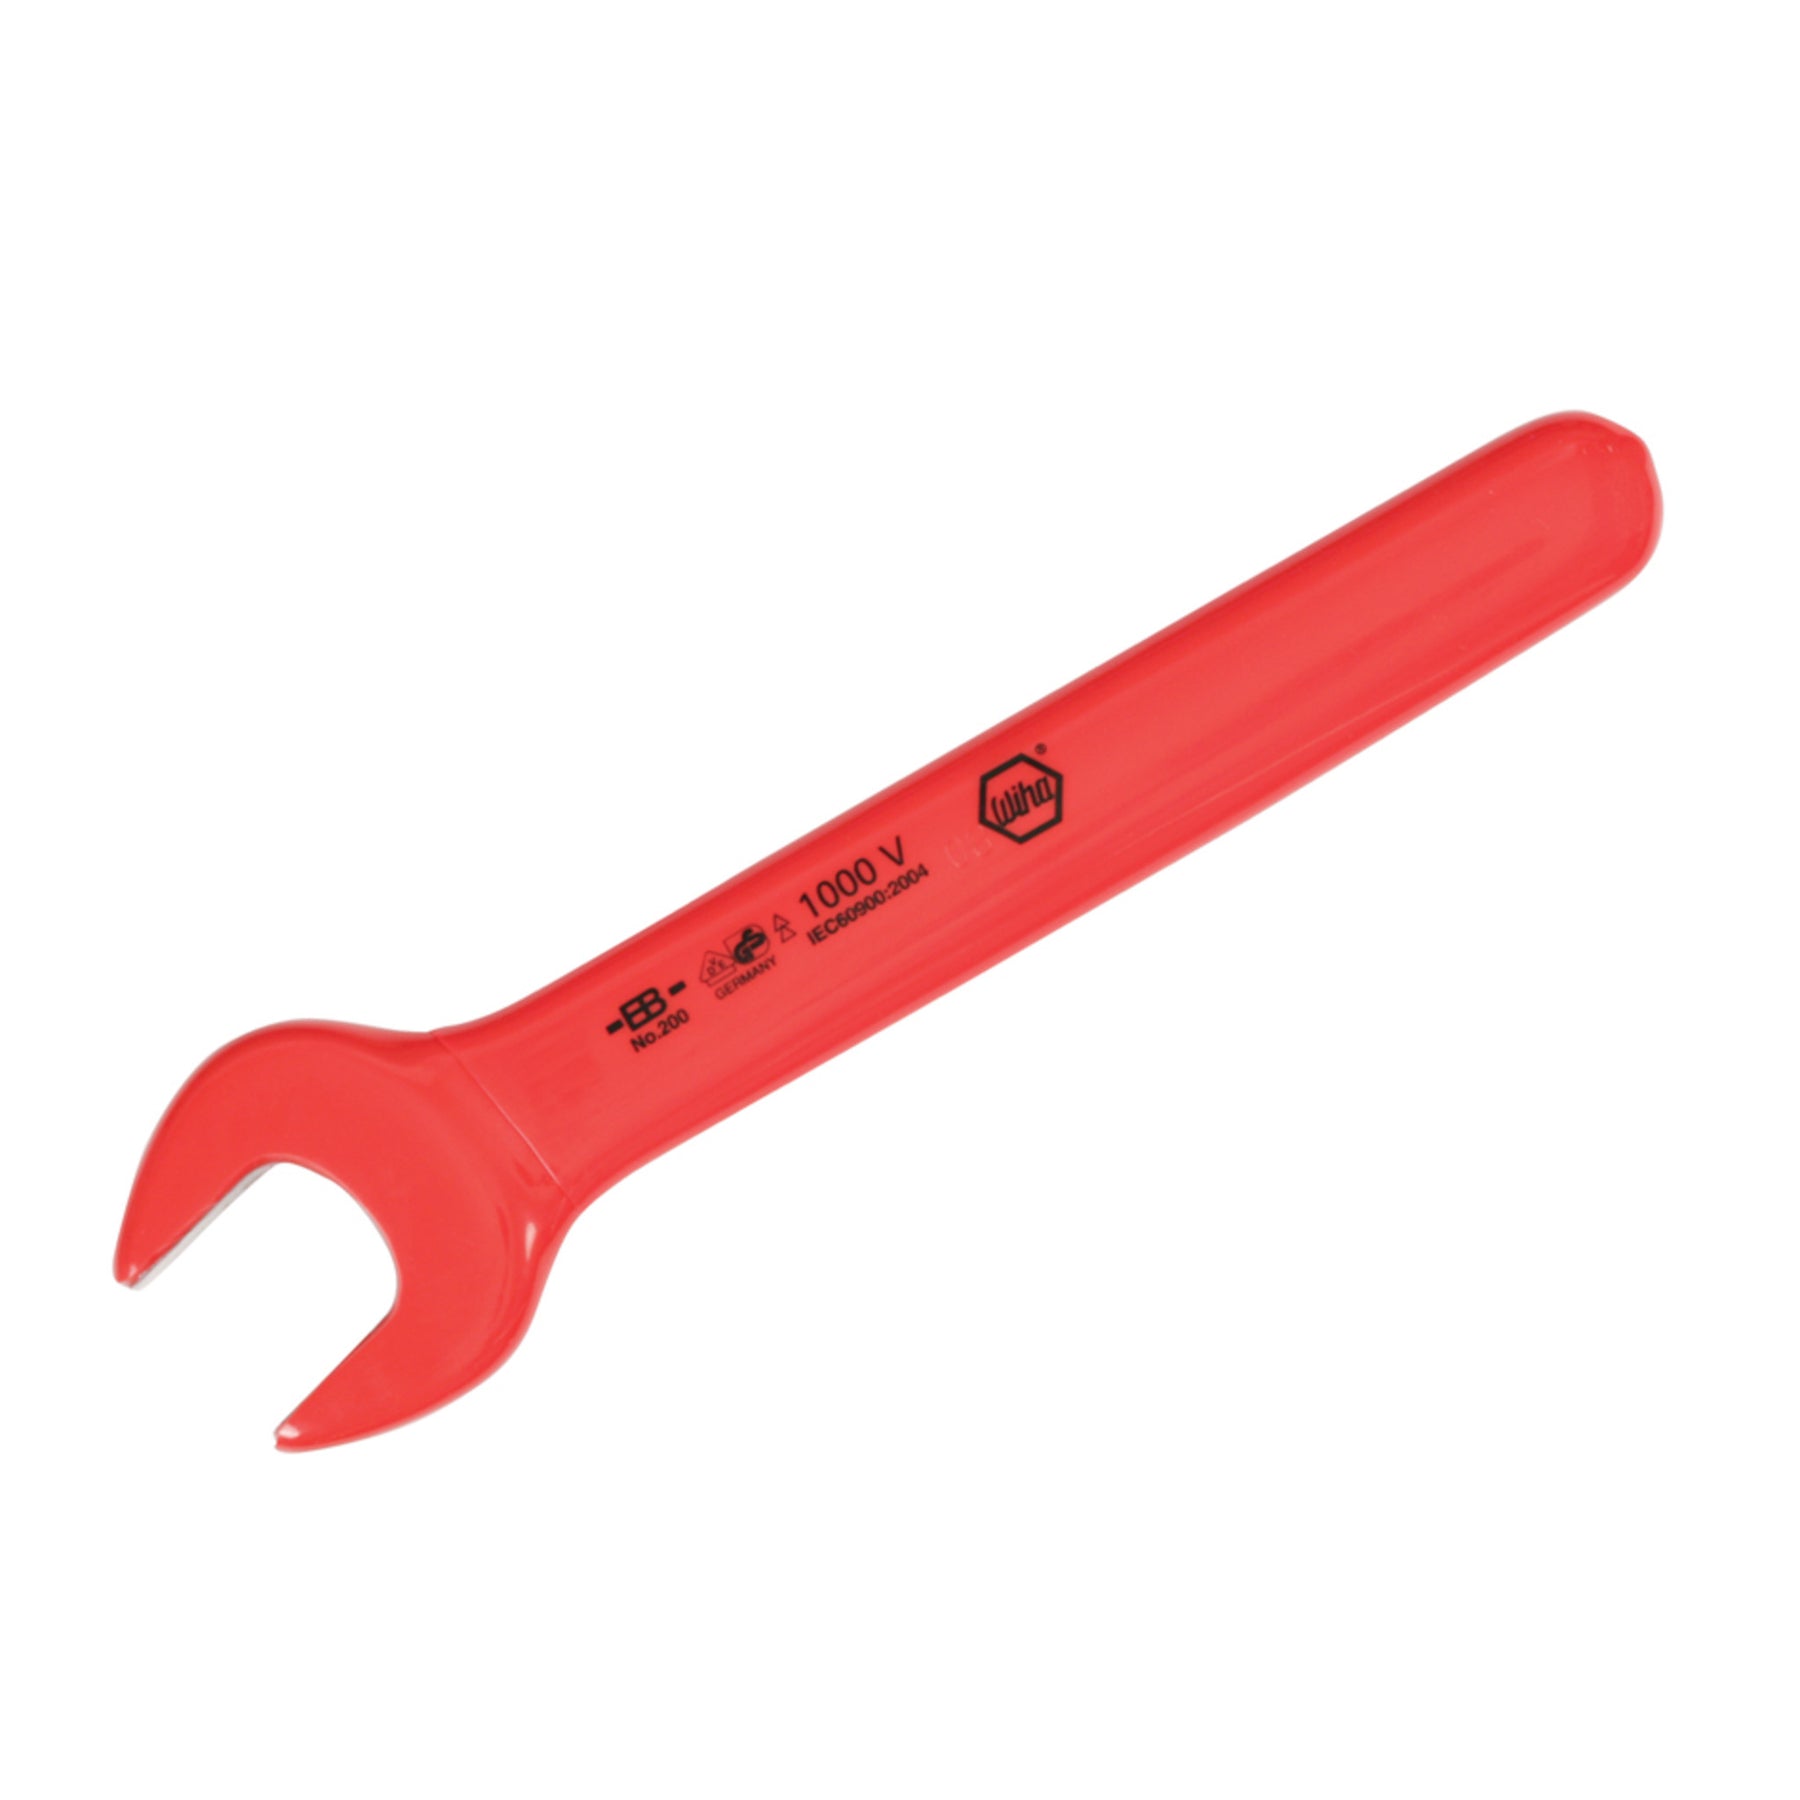 Wiha 20009 Insulated Open End Wrench 9.0mm